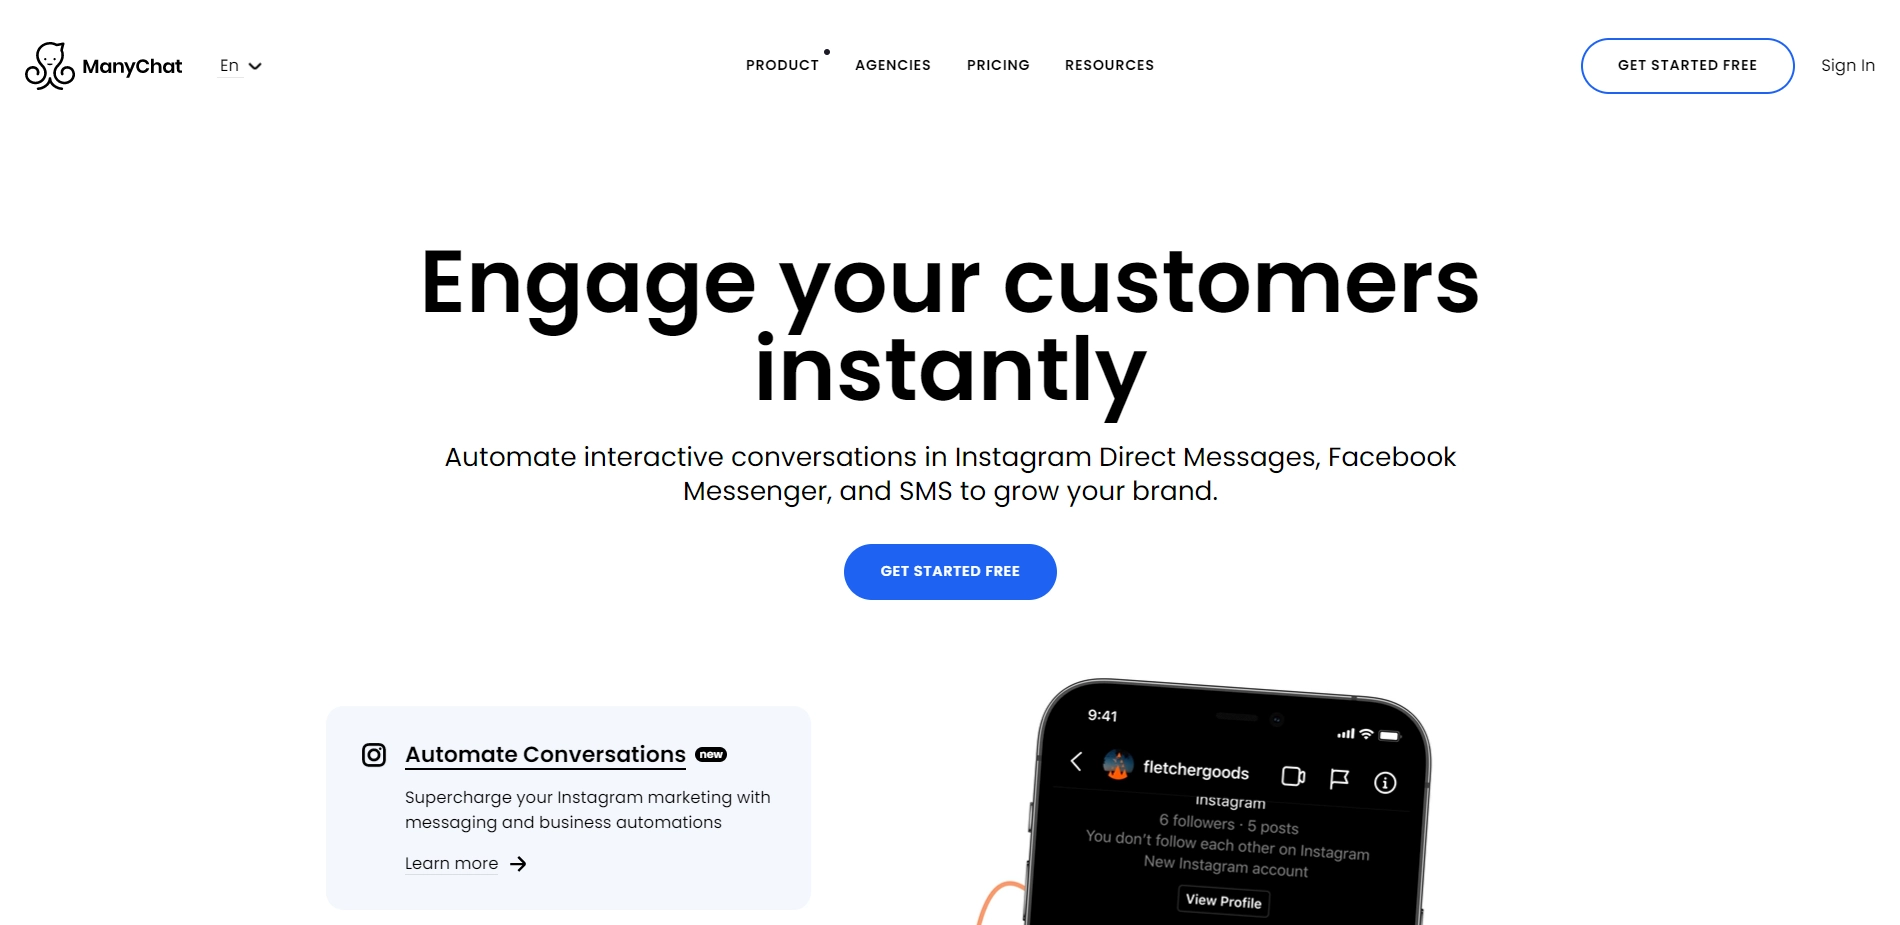 Manychat landing page